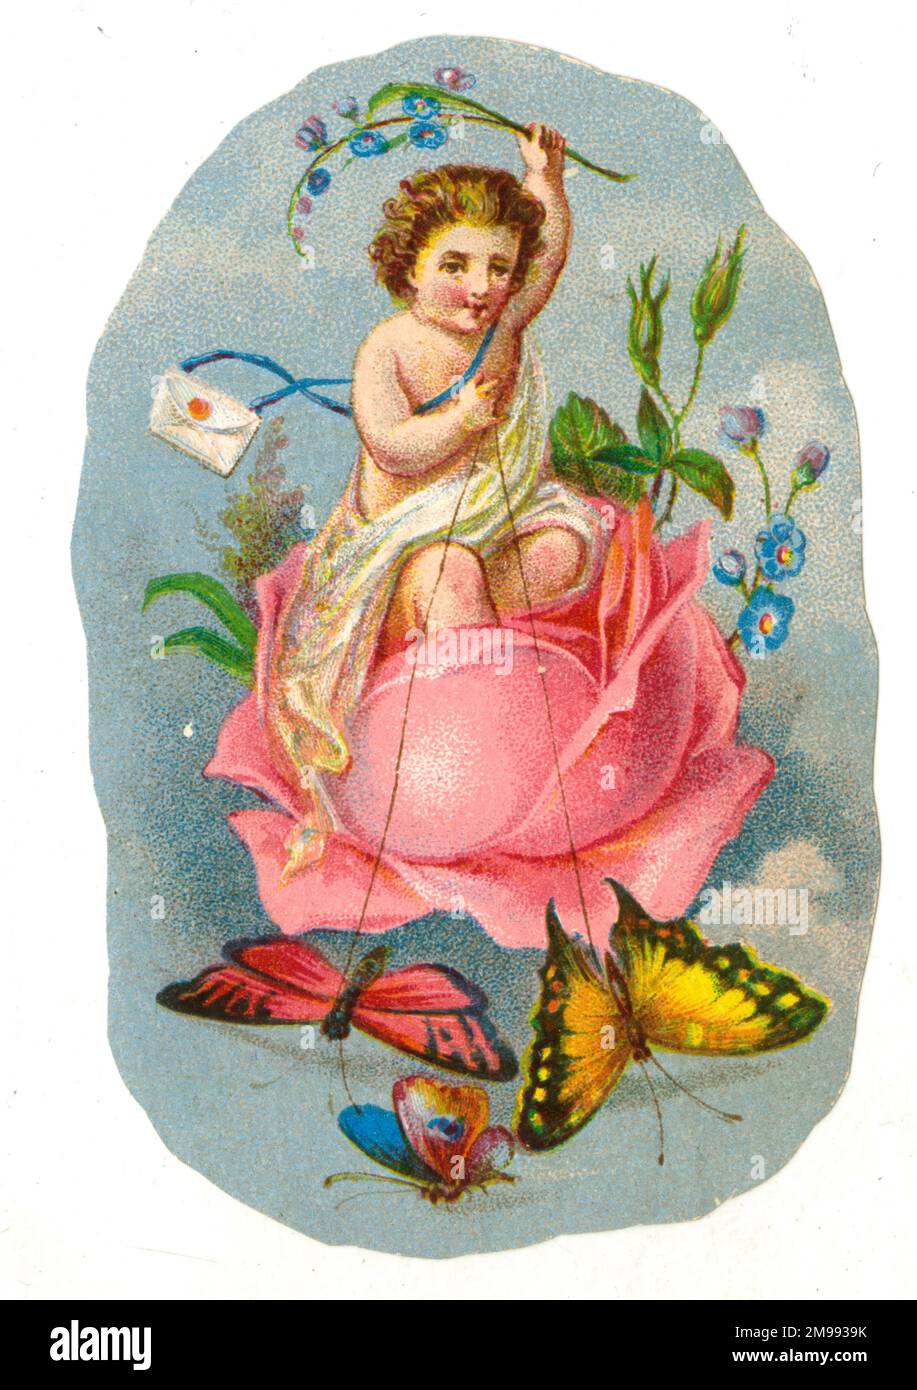 Christmas Cracker Label, Cherub with Love Letter or Valentine's Card riding in a pink rose pulled along by butterflies. Stock Photo